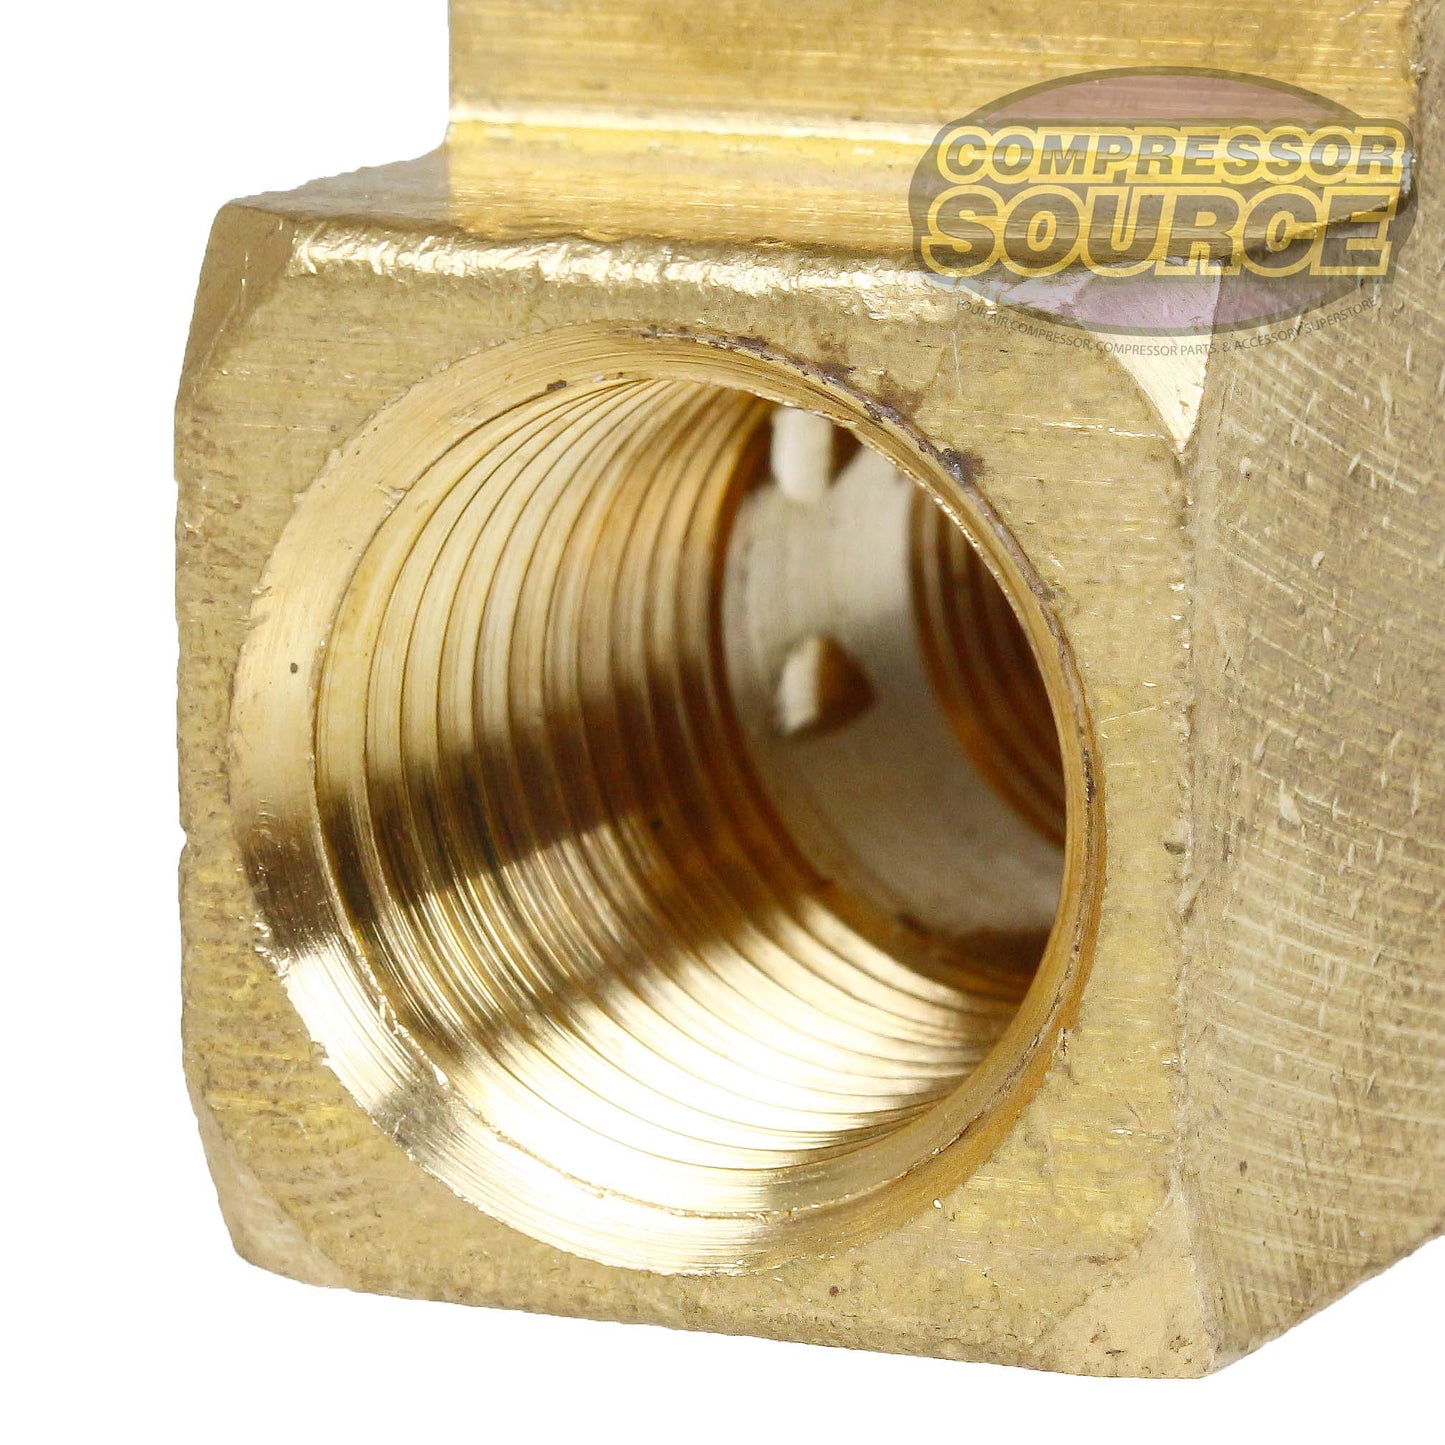 3/8" NPTF Female Union Tee Solid Brass Pipe Fitting T Joint Hose Connector New